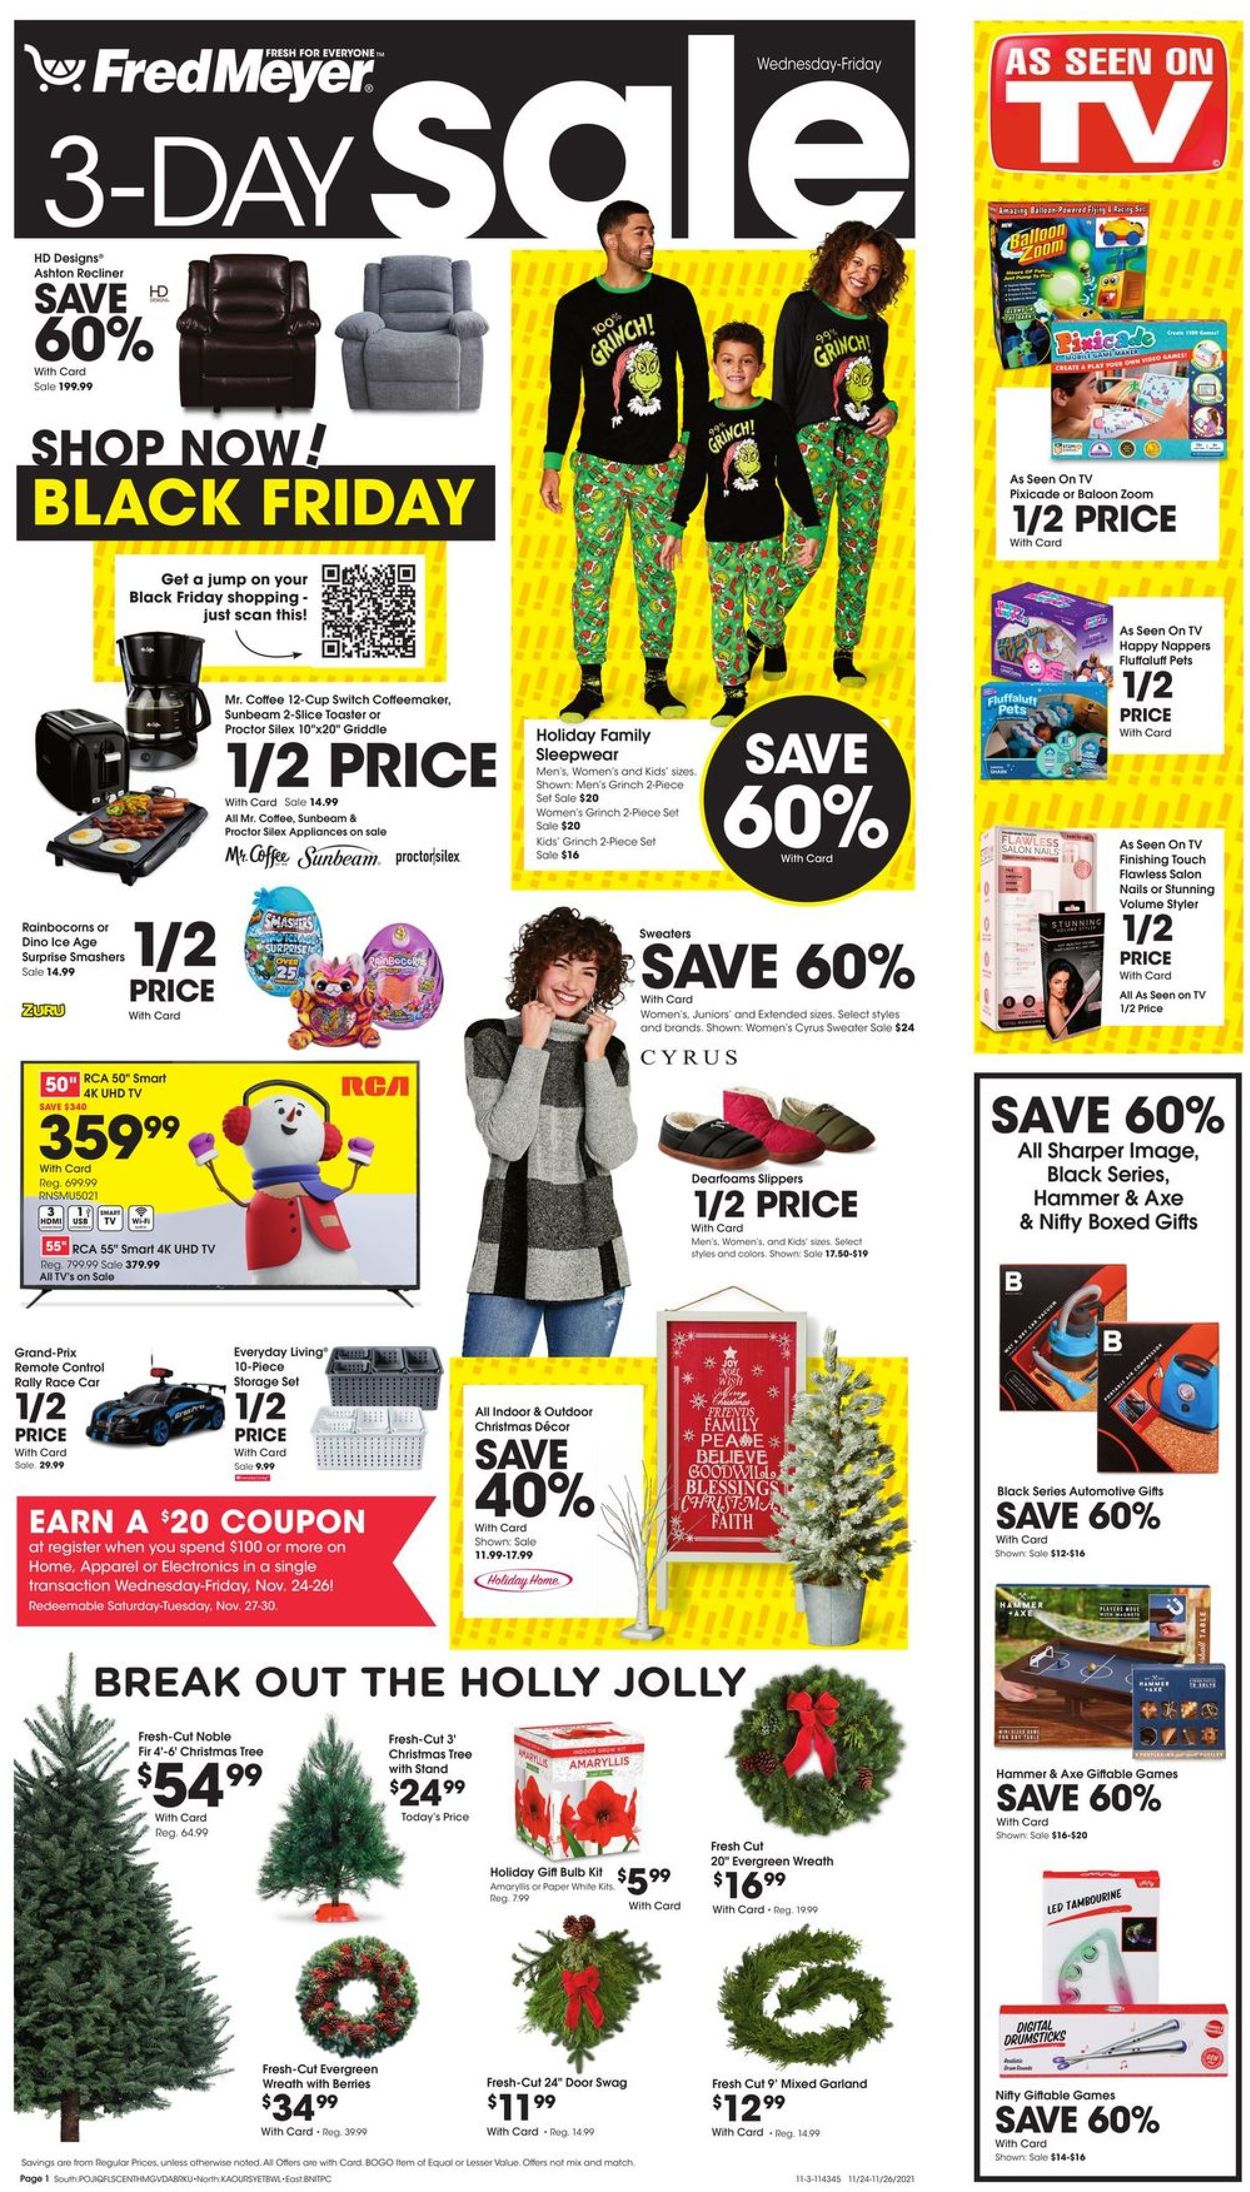 Fred Meyer BLACK FRIDAY AD 2021 Current weekly ad 11/24 11/26/2021